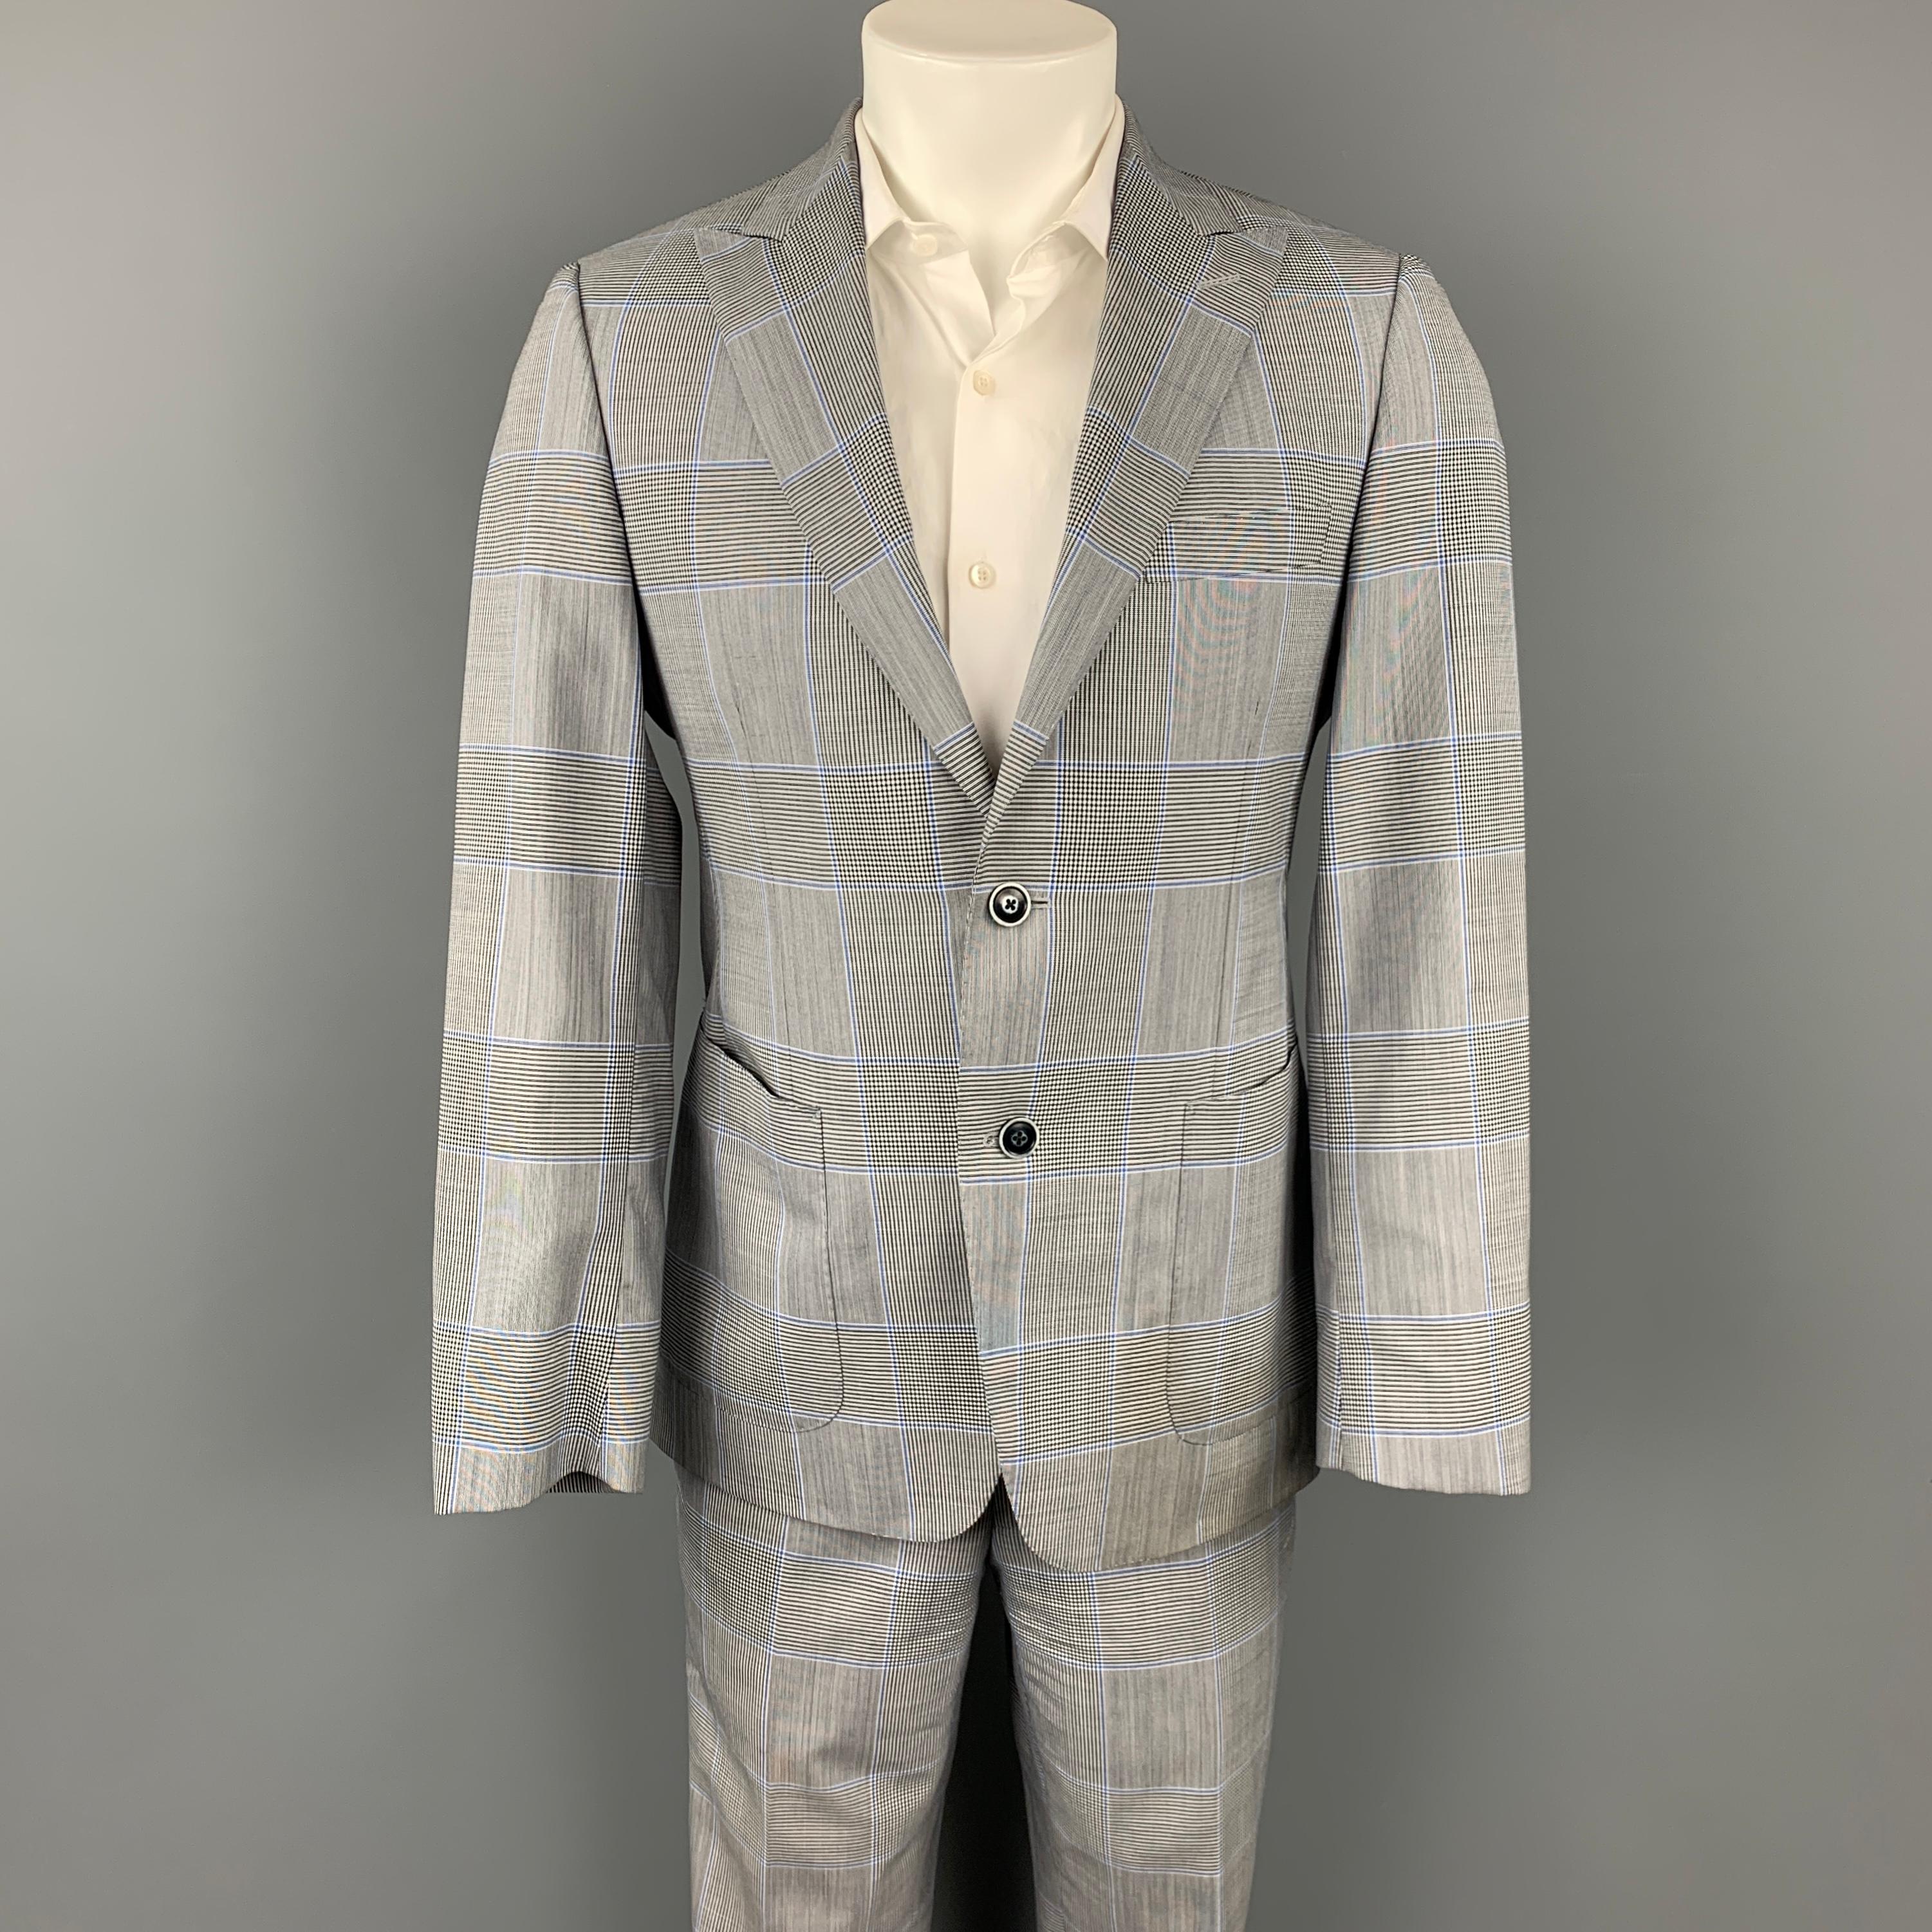 SAMUELSOHN for WILKES BASHFORD suit comes in a grey & blue glenplaid wool with a full liner and includes a single breasted, two button sport coat with a peak lapel and matching flat front trousers.

Very Good Pre-Owned Condition.
Marked: